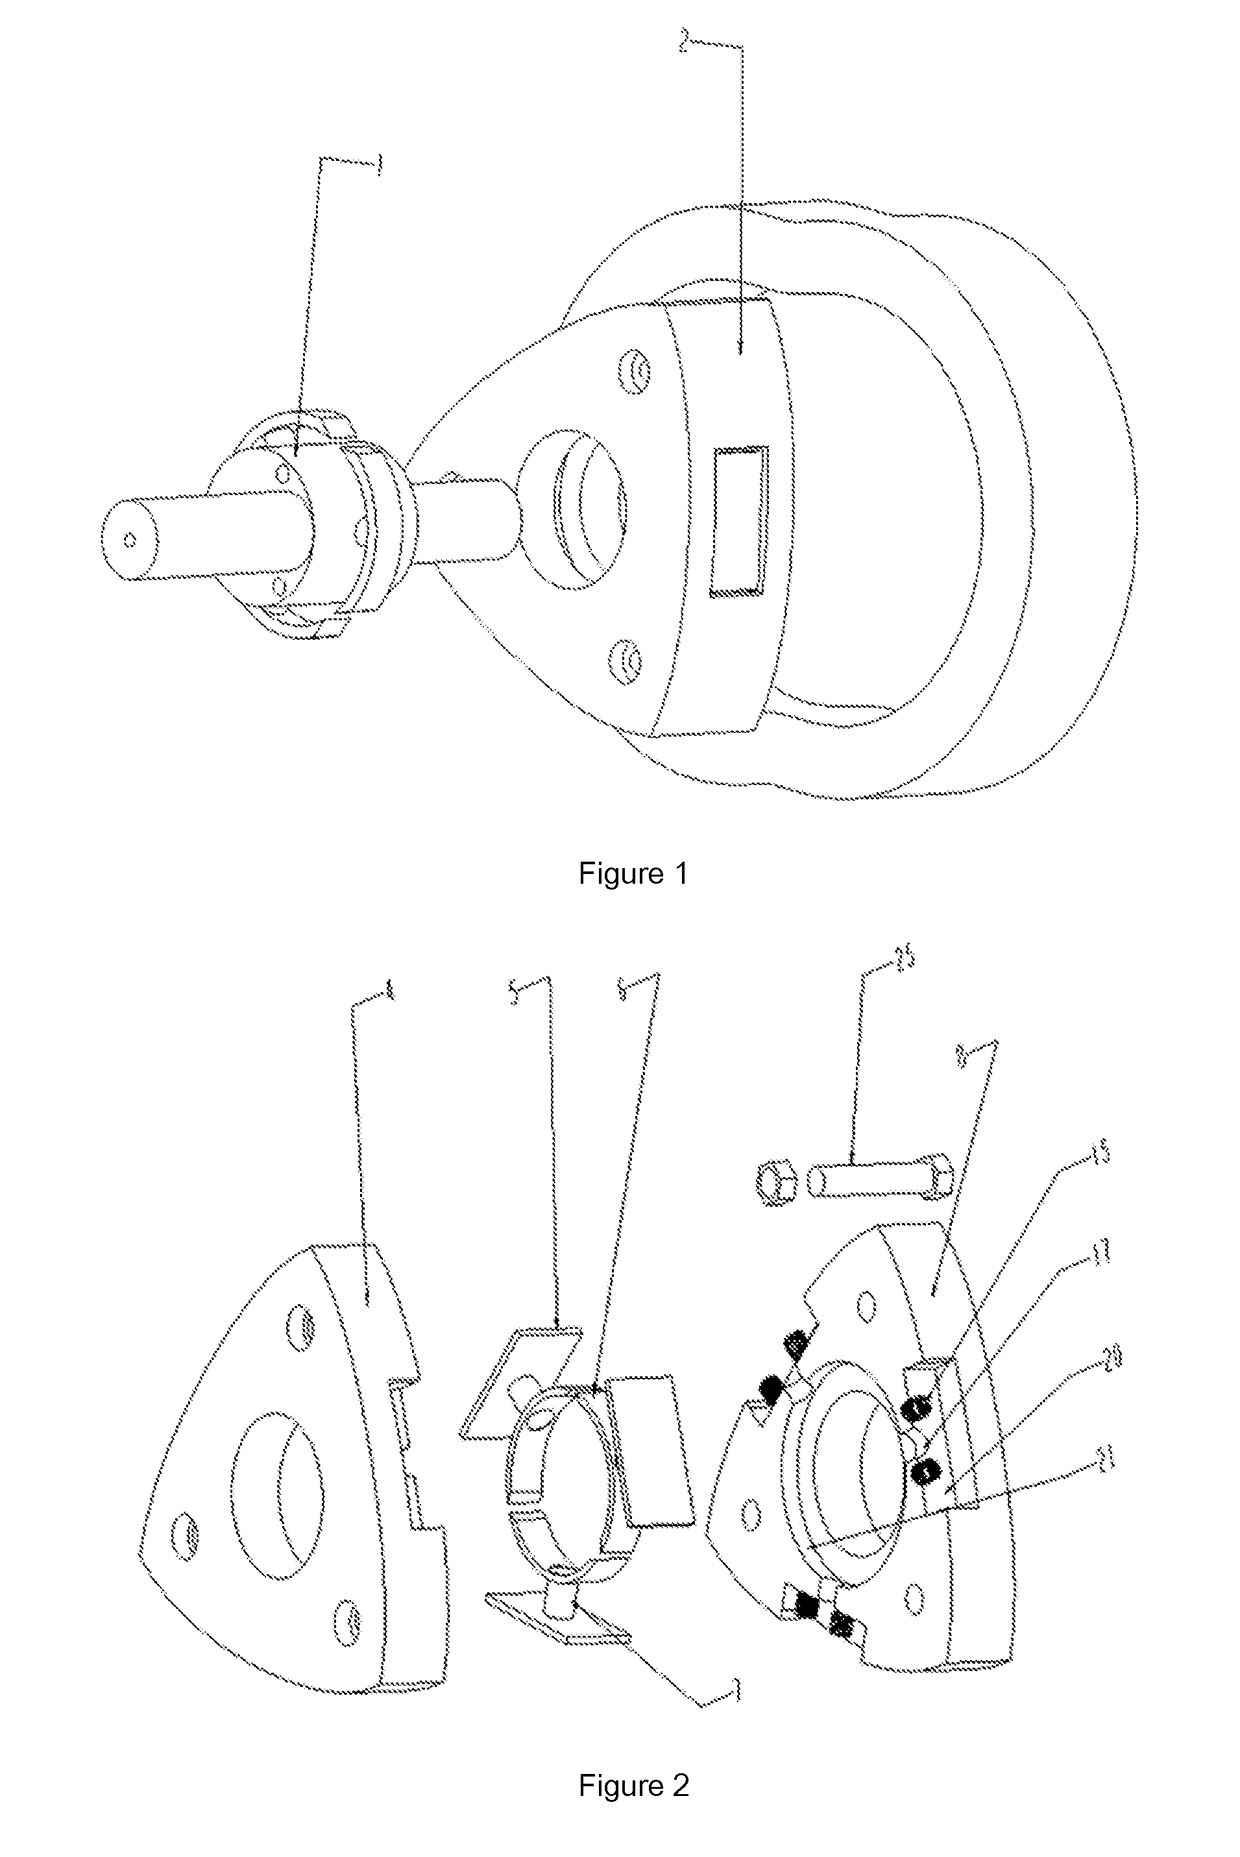 Control device to achieve variable compression ratio for triangle rotary engine